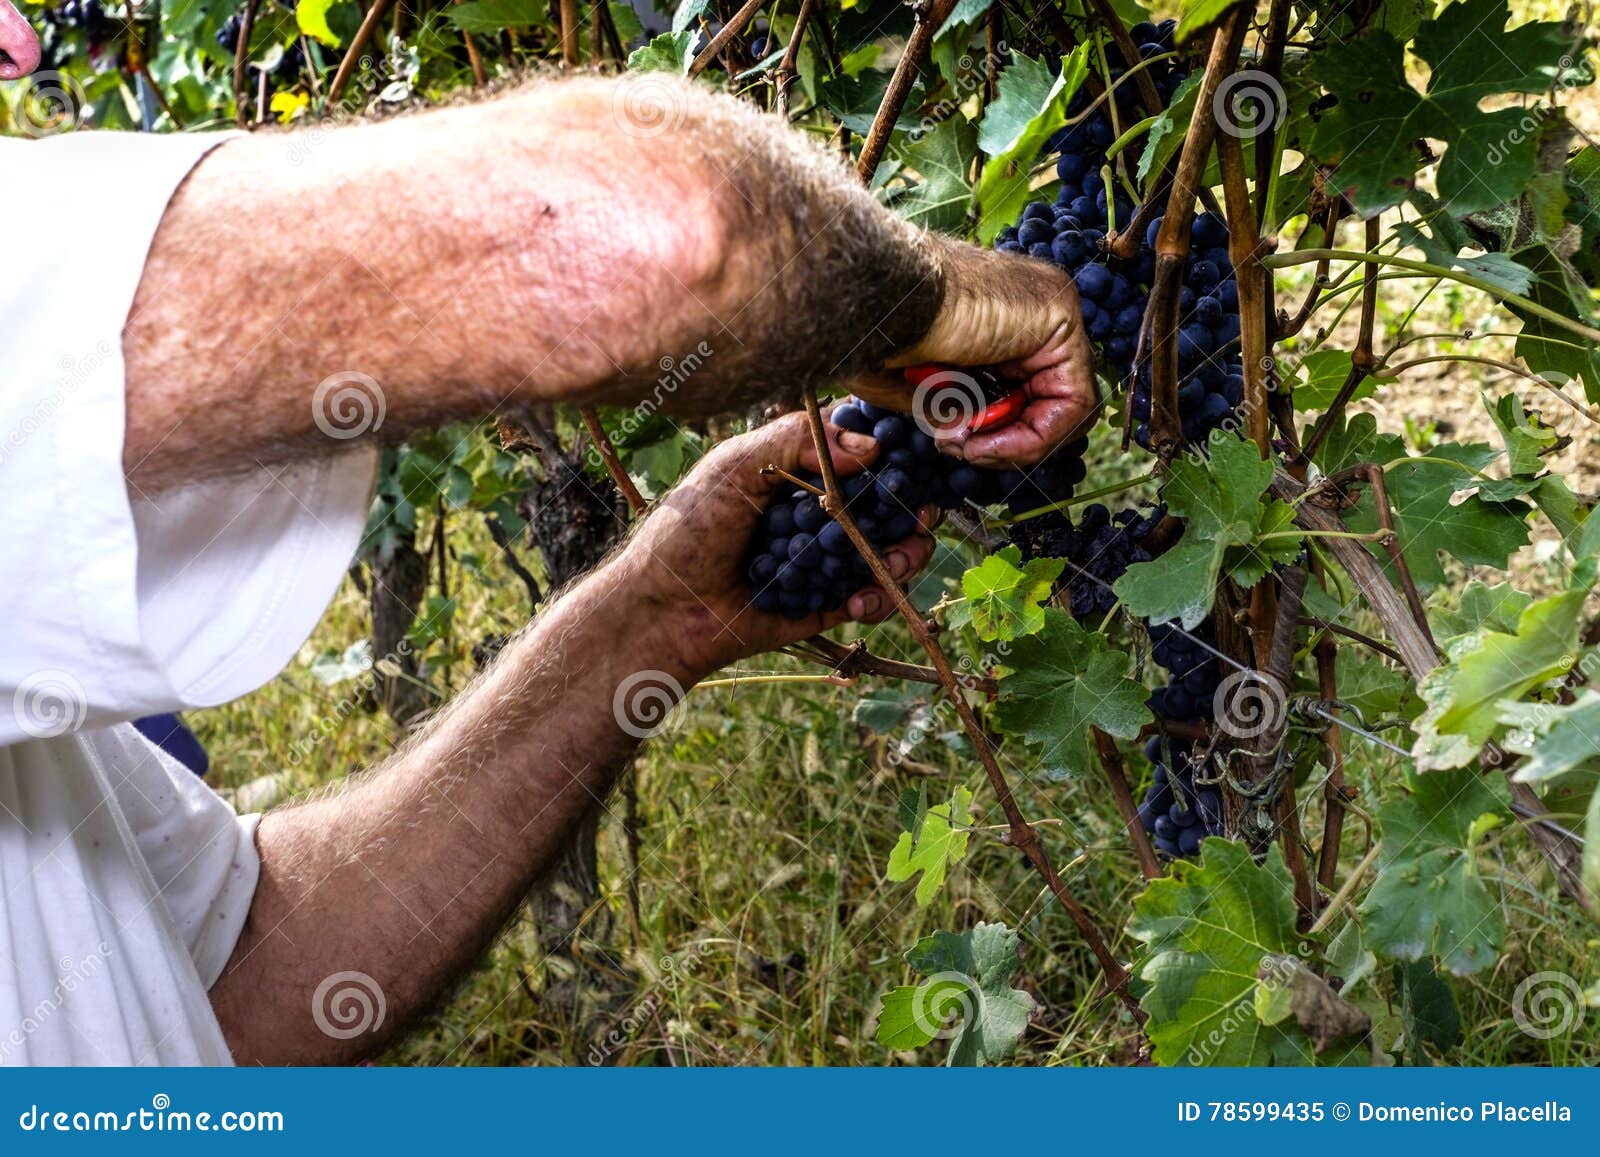 farmer cutting grapes with scissors